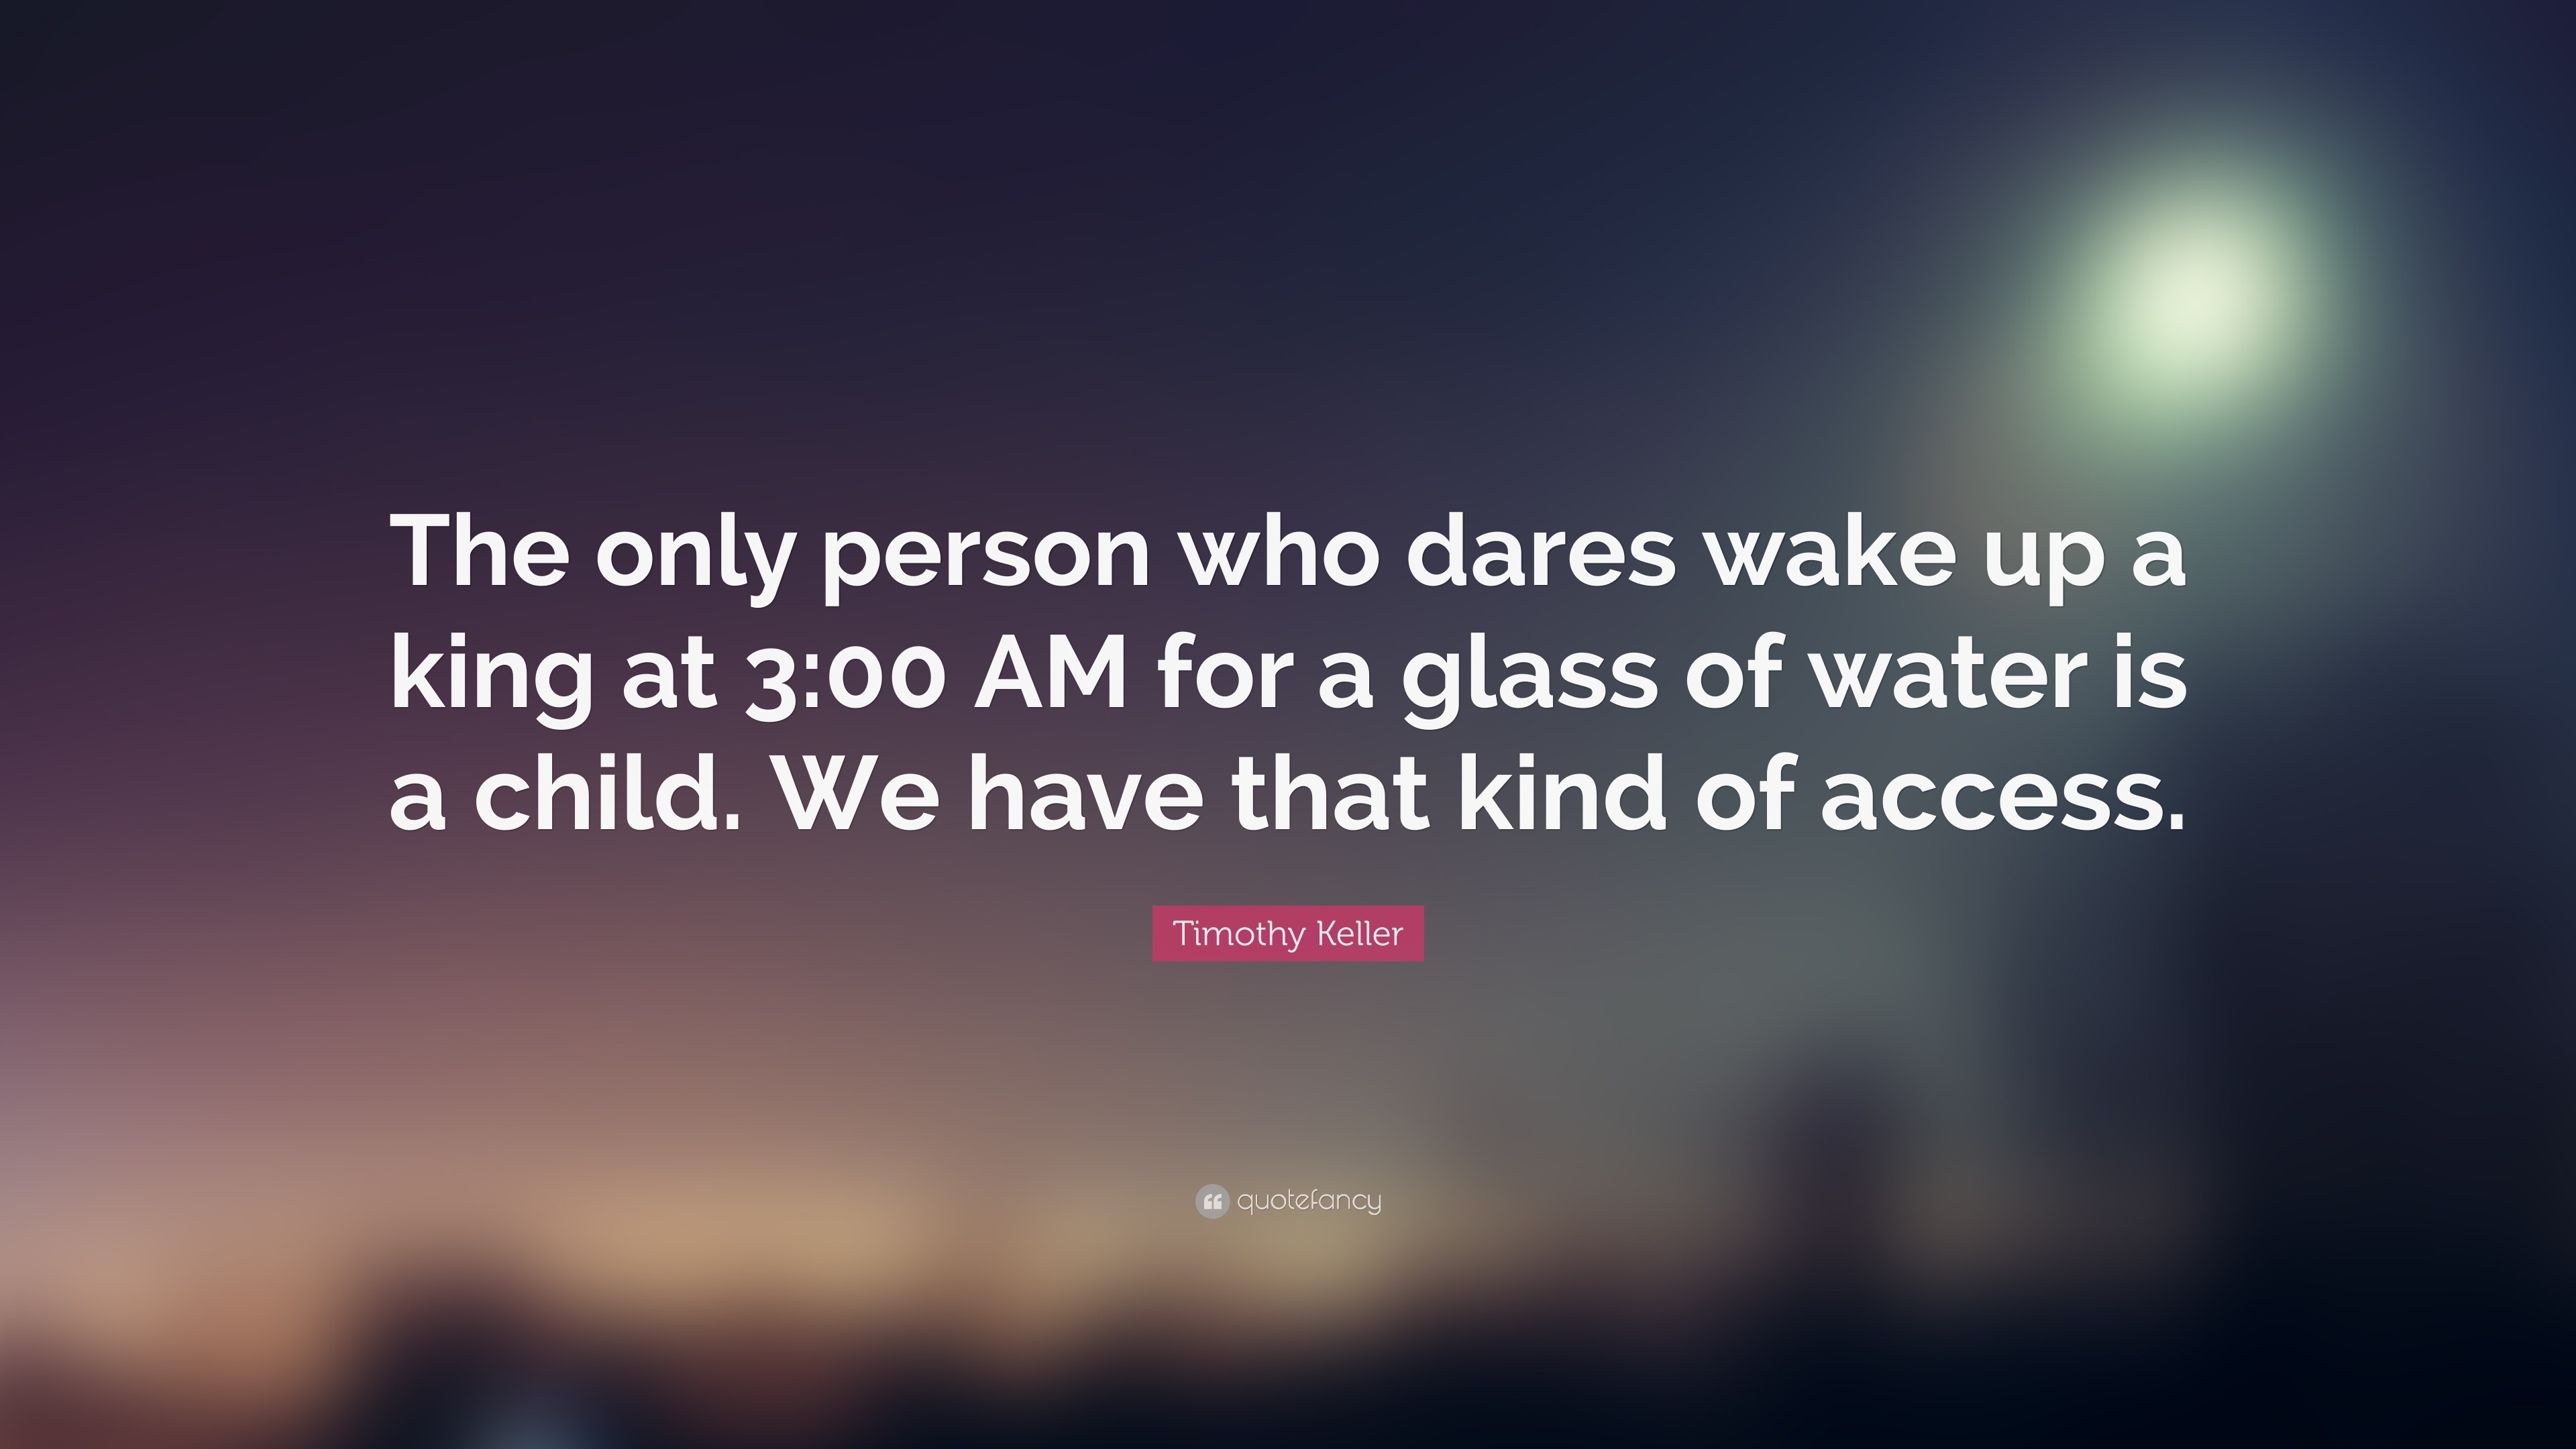 Timothy Keller Quote The Only Person Who Dares Wake Up A King At 3 00 Am